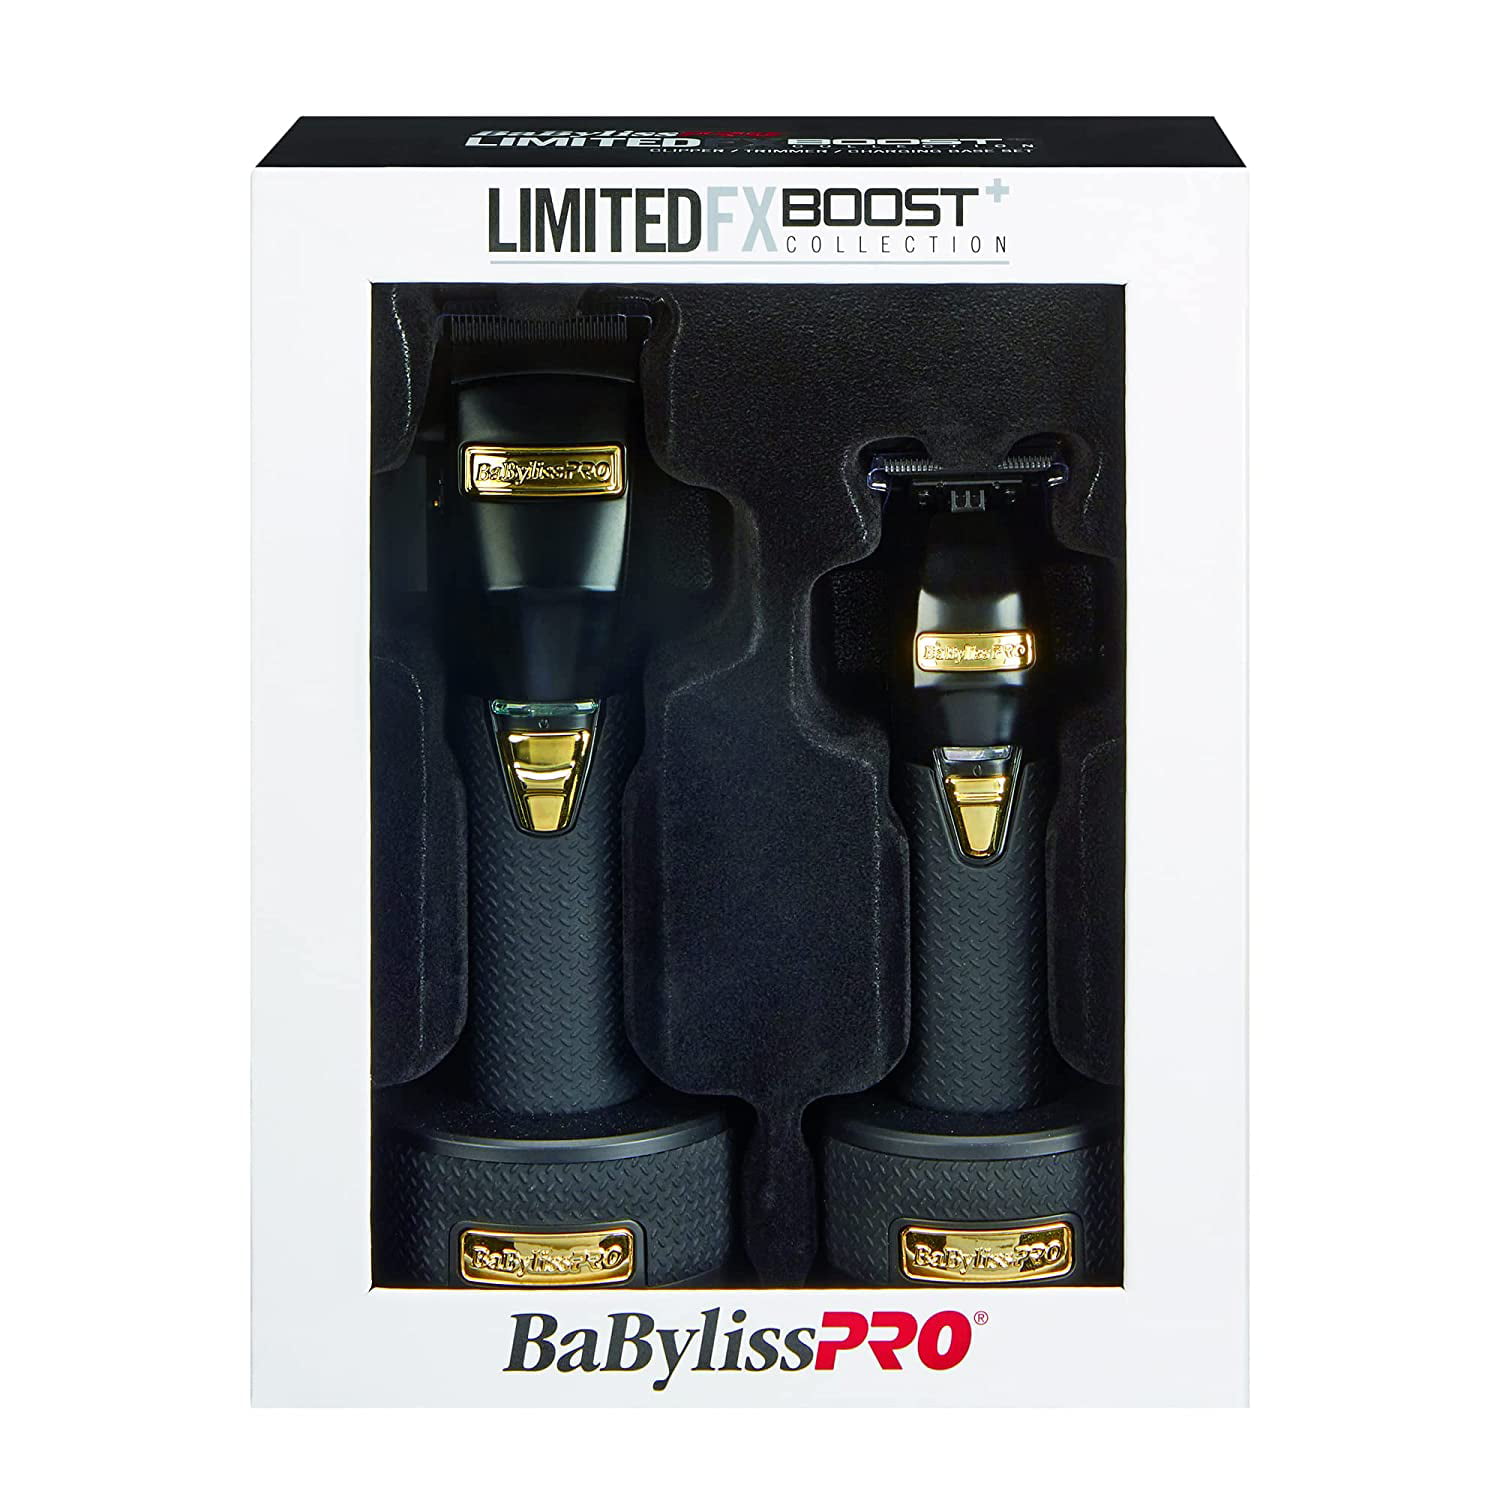 thick Humorous Explanation BaByliss Pro Limited FX Boost+, Black Gold - Walmart.com